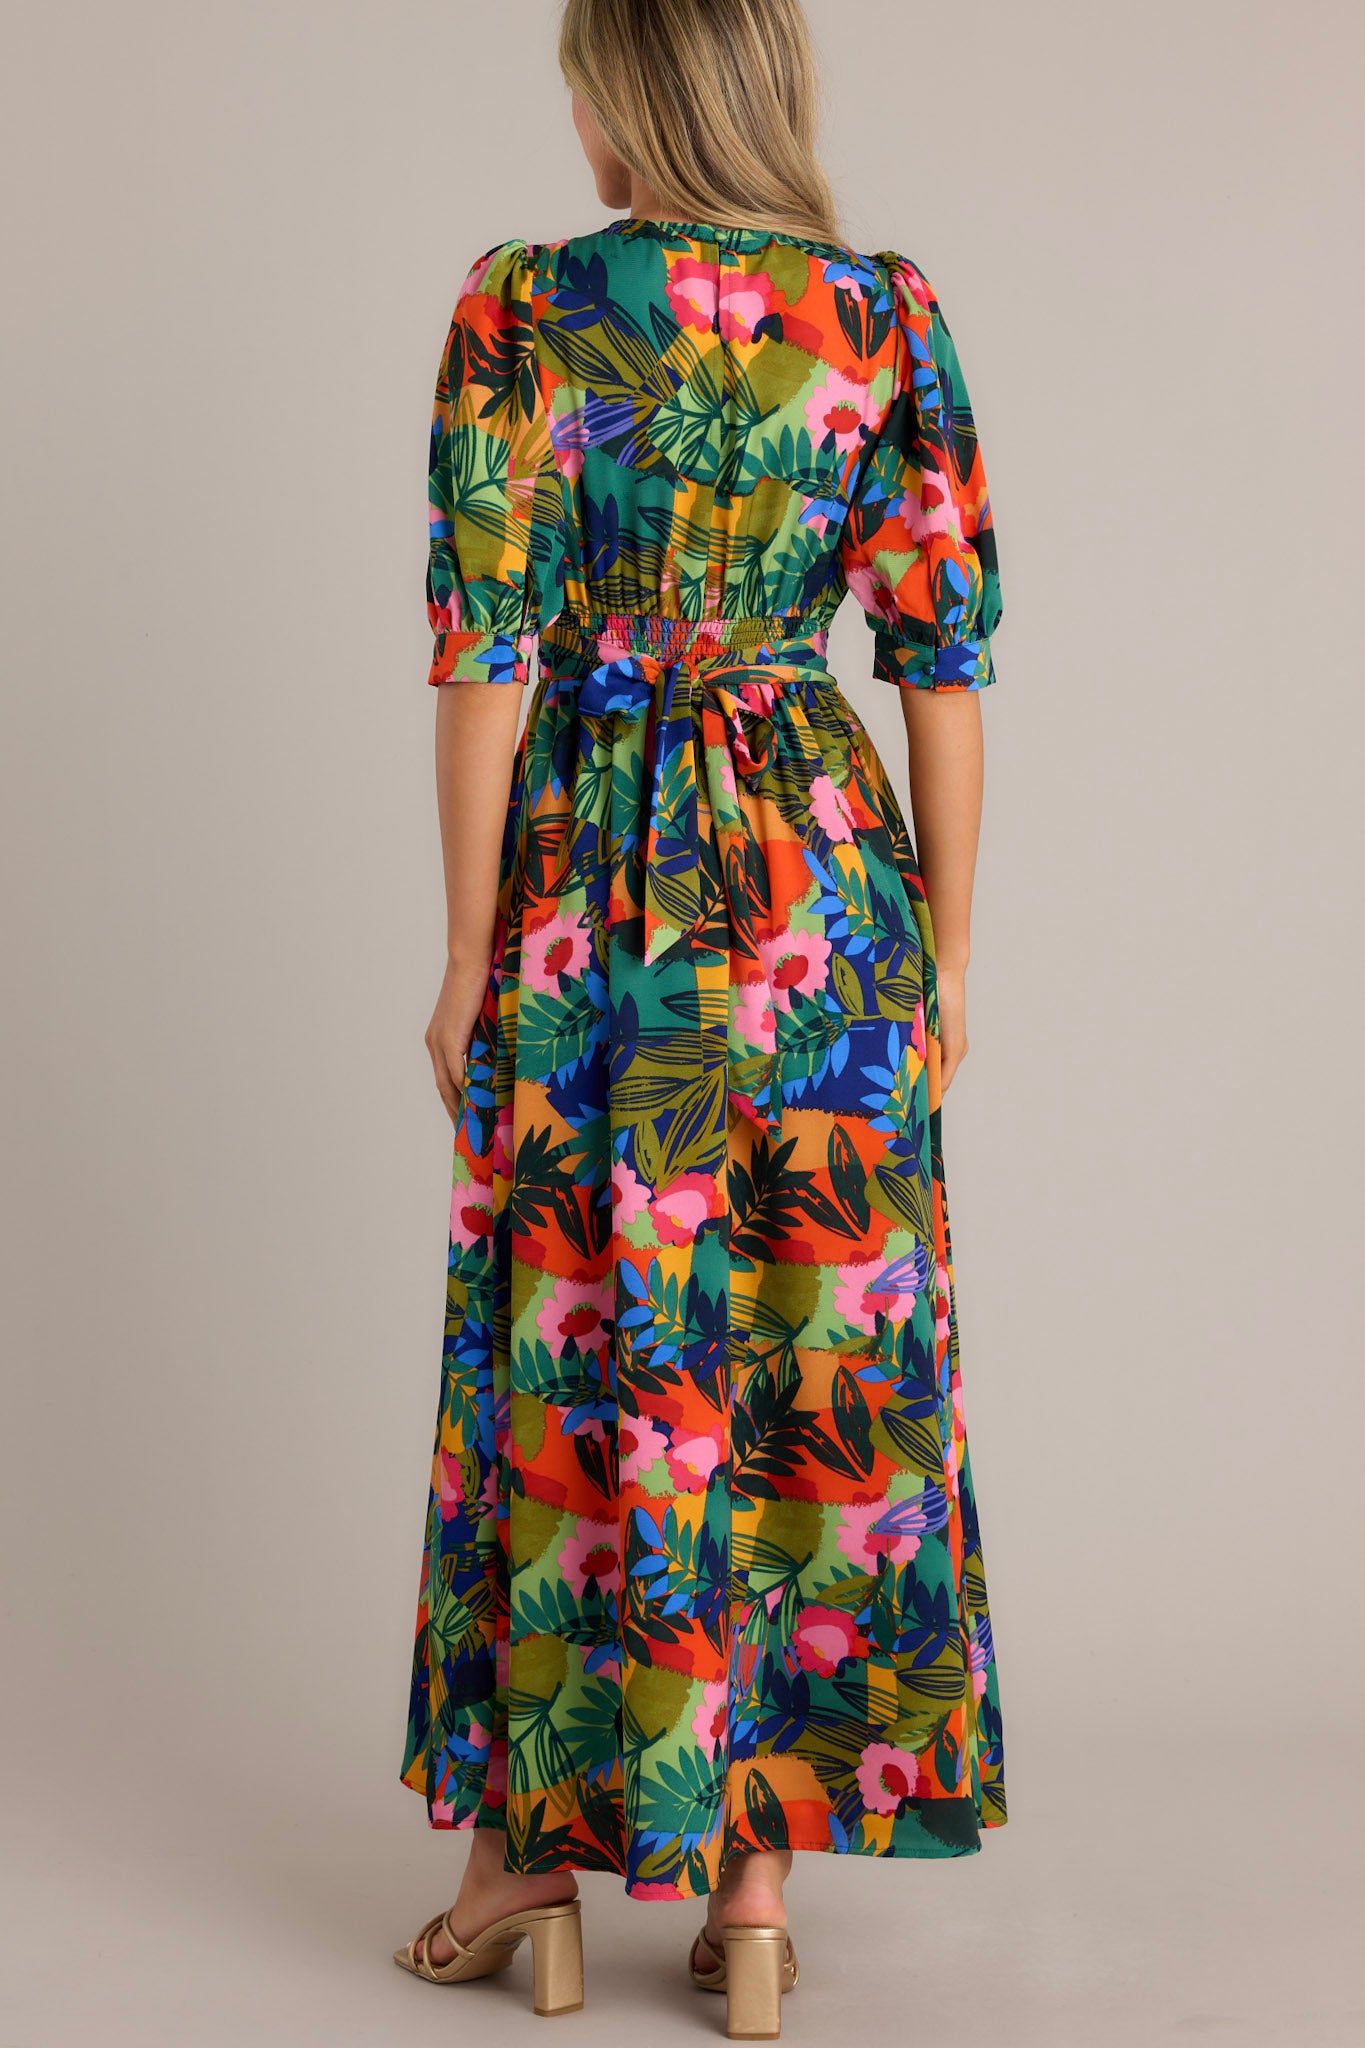 Back view of a tropical-themed long dress featuring vibrant tropical patterns and a deep V-neckline.